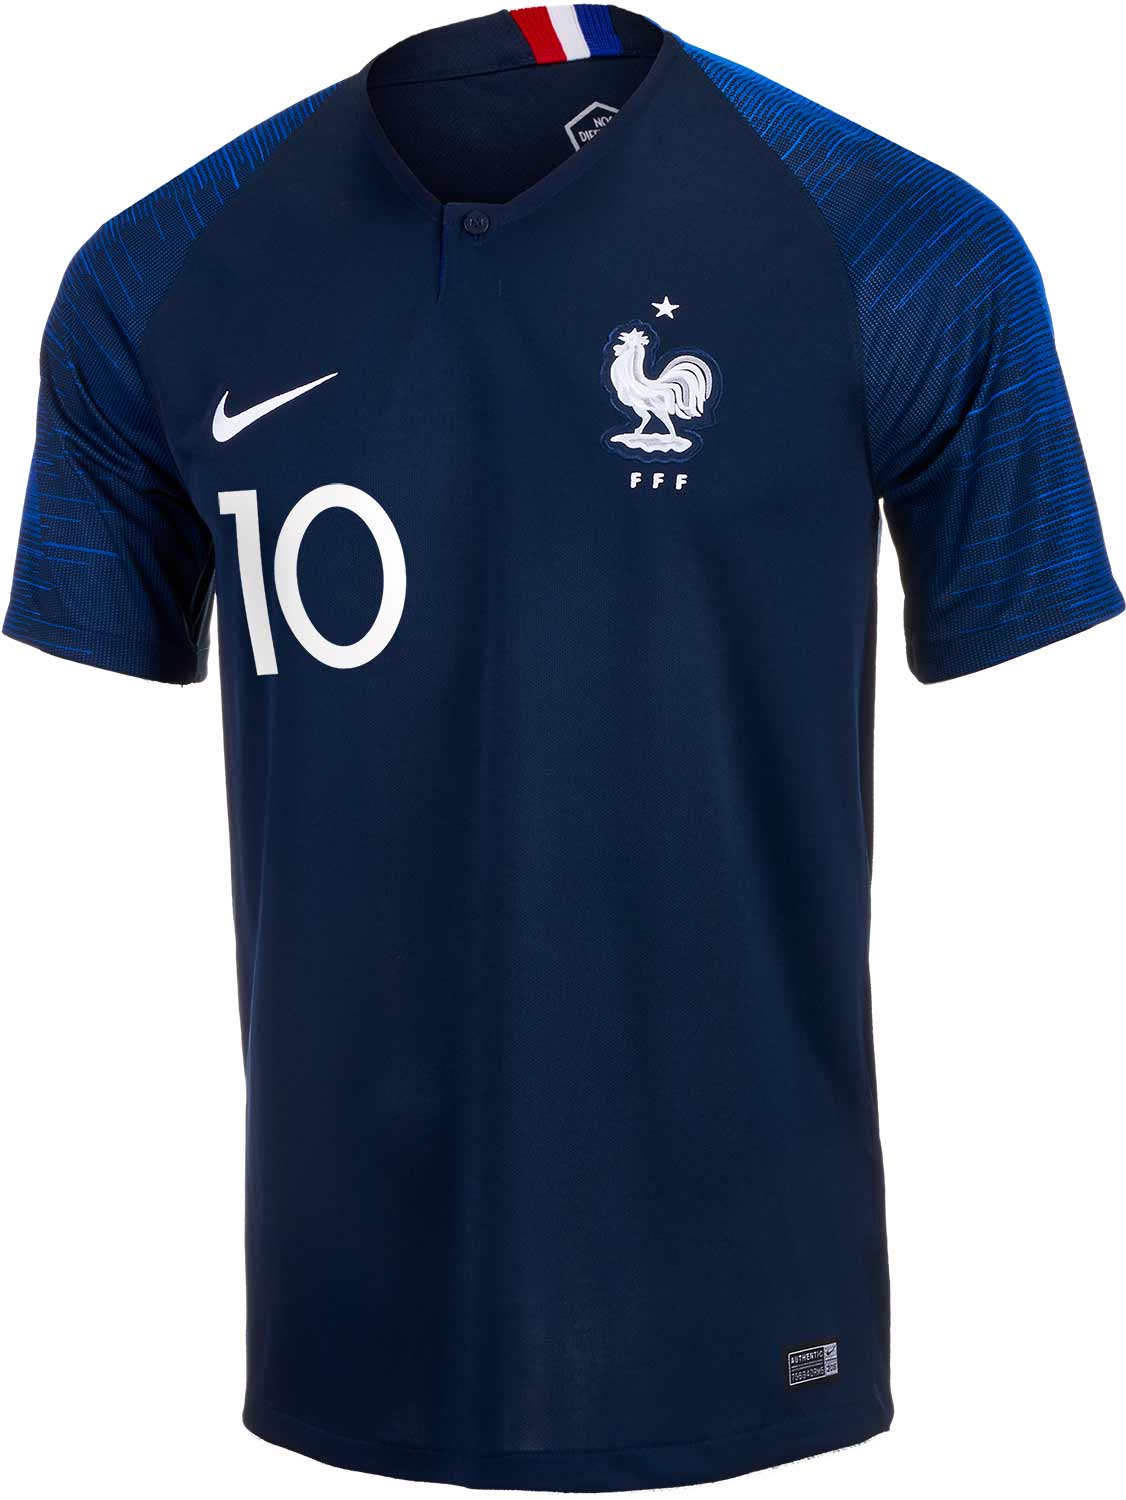 mbappe france jersey youth